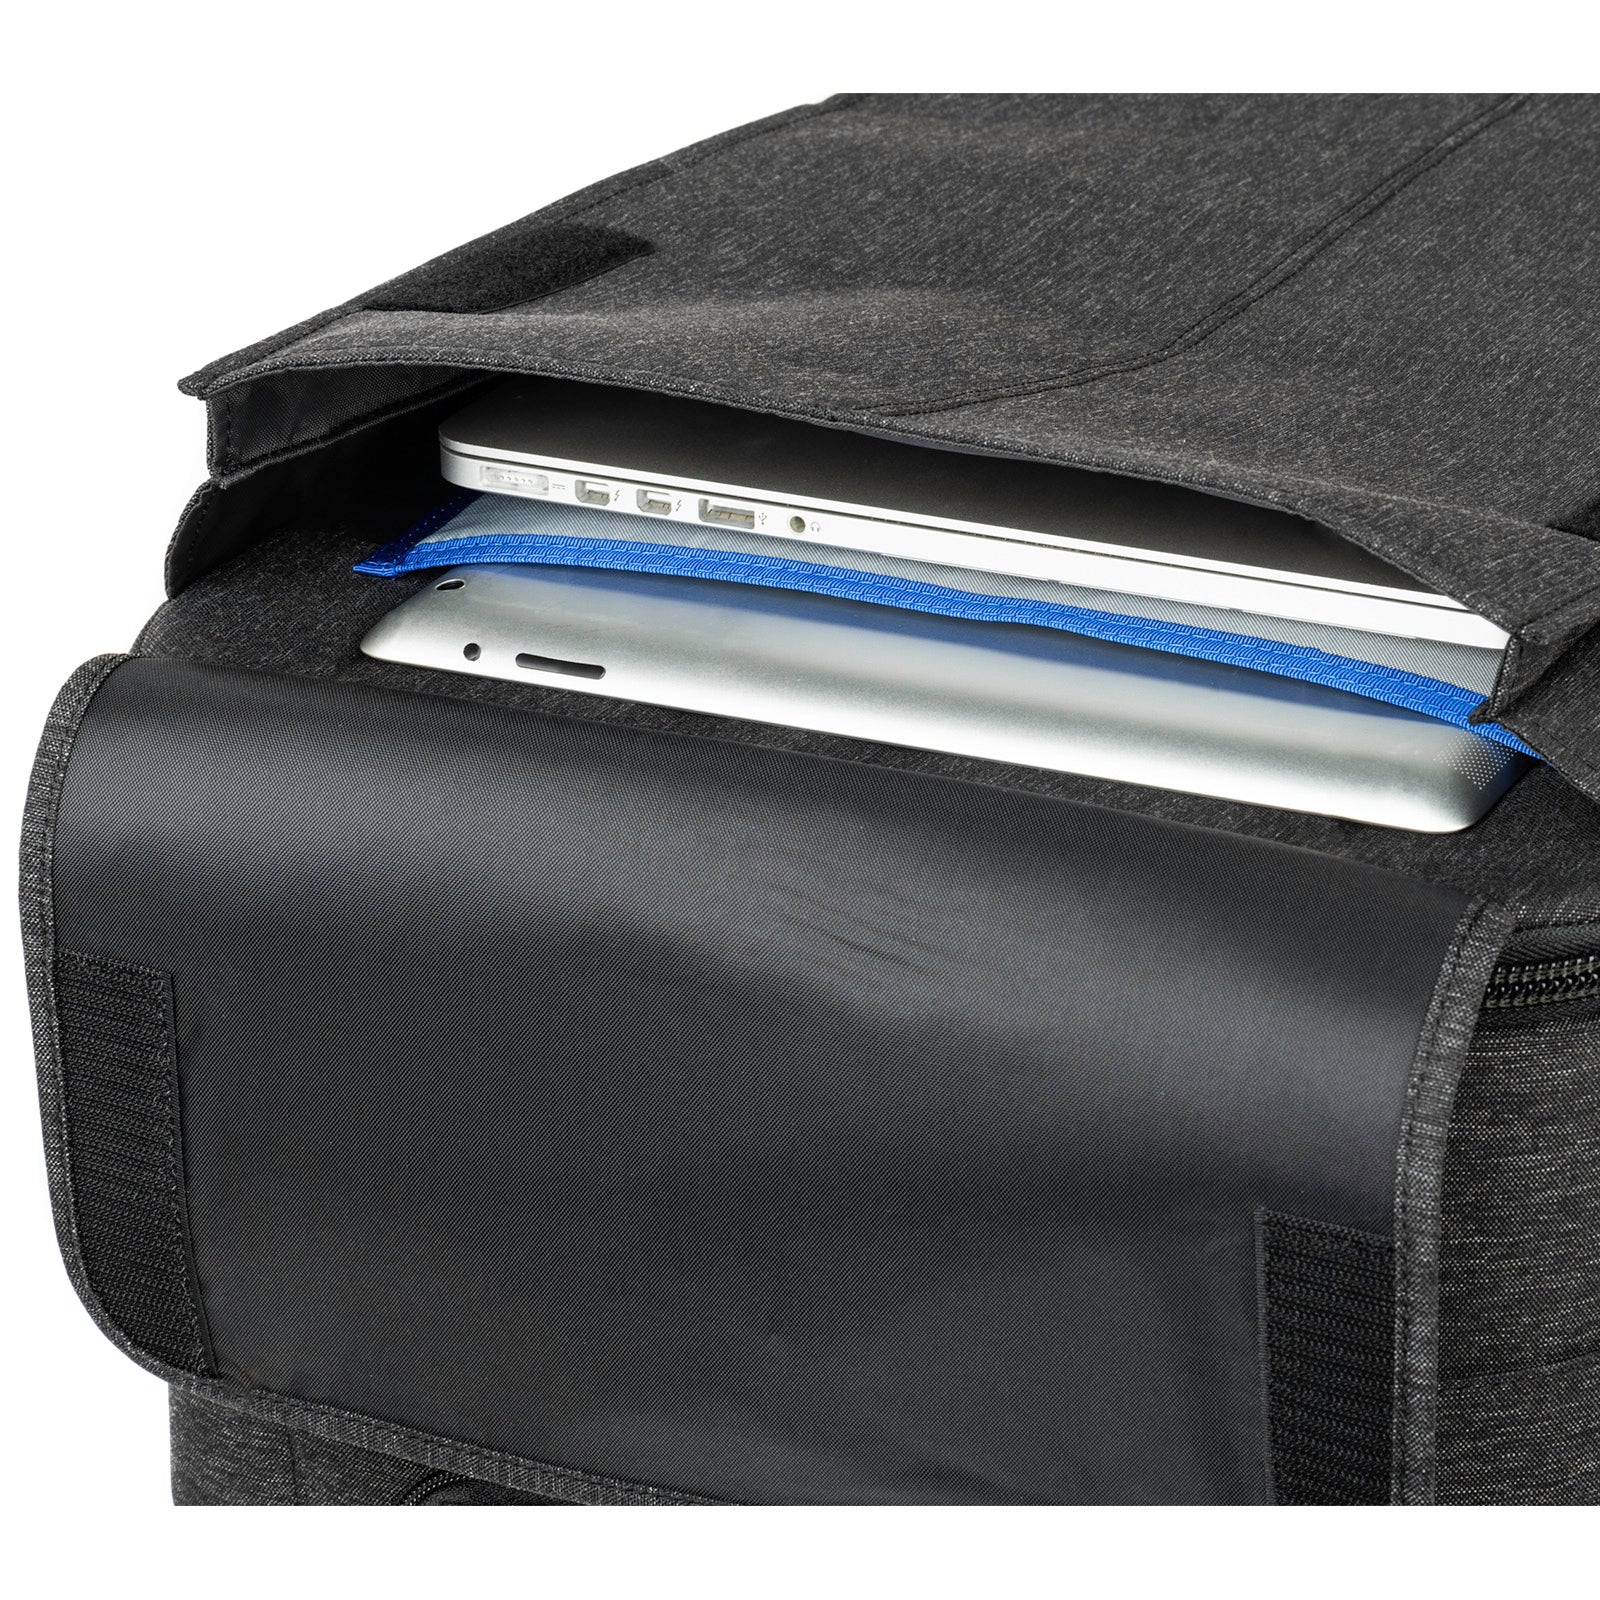 Front pocket fits up to a 17” laptop and 10” tablet - Laptop may expand external dimensions of the roller